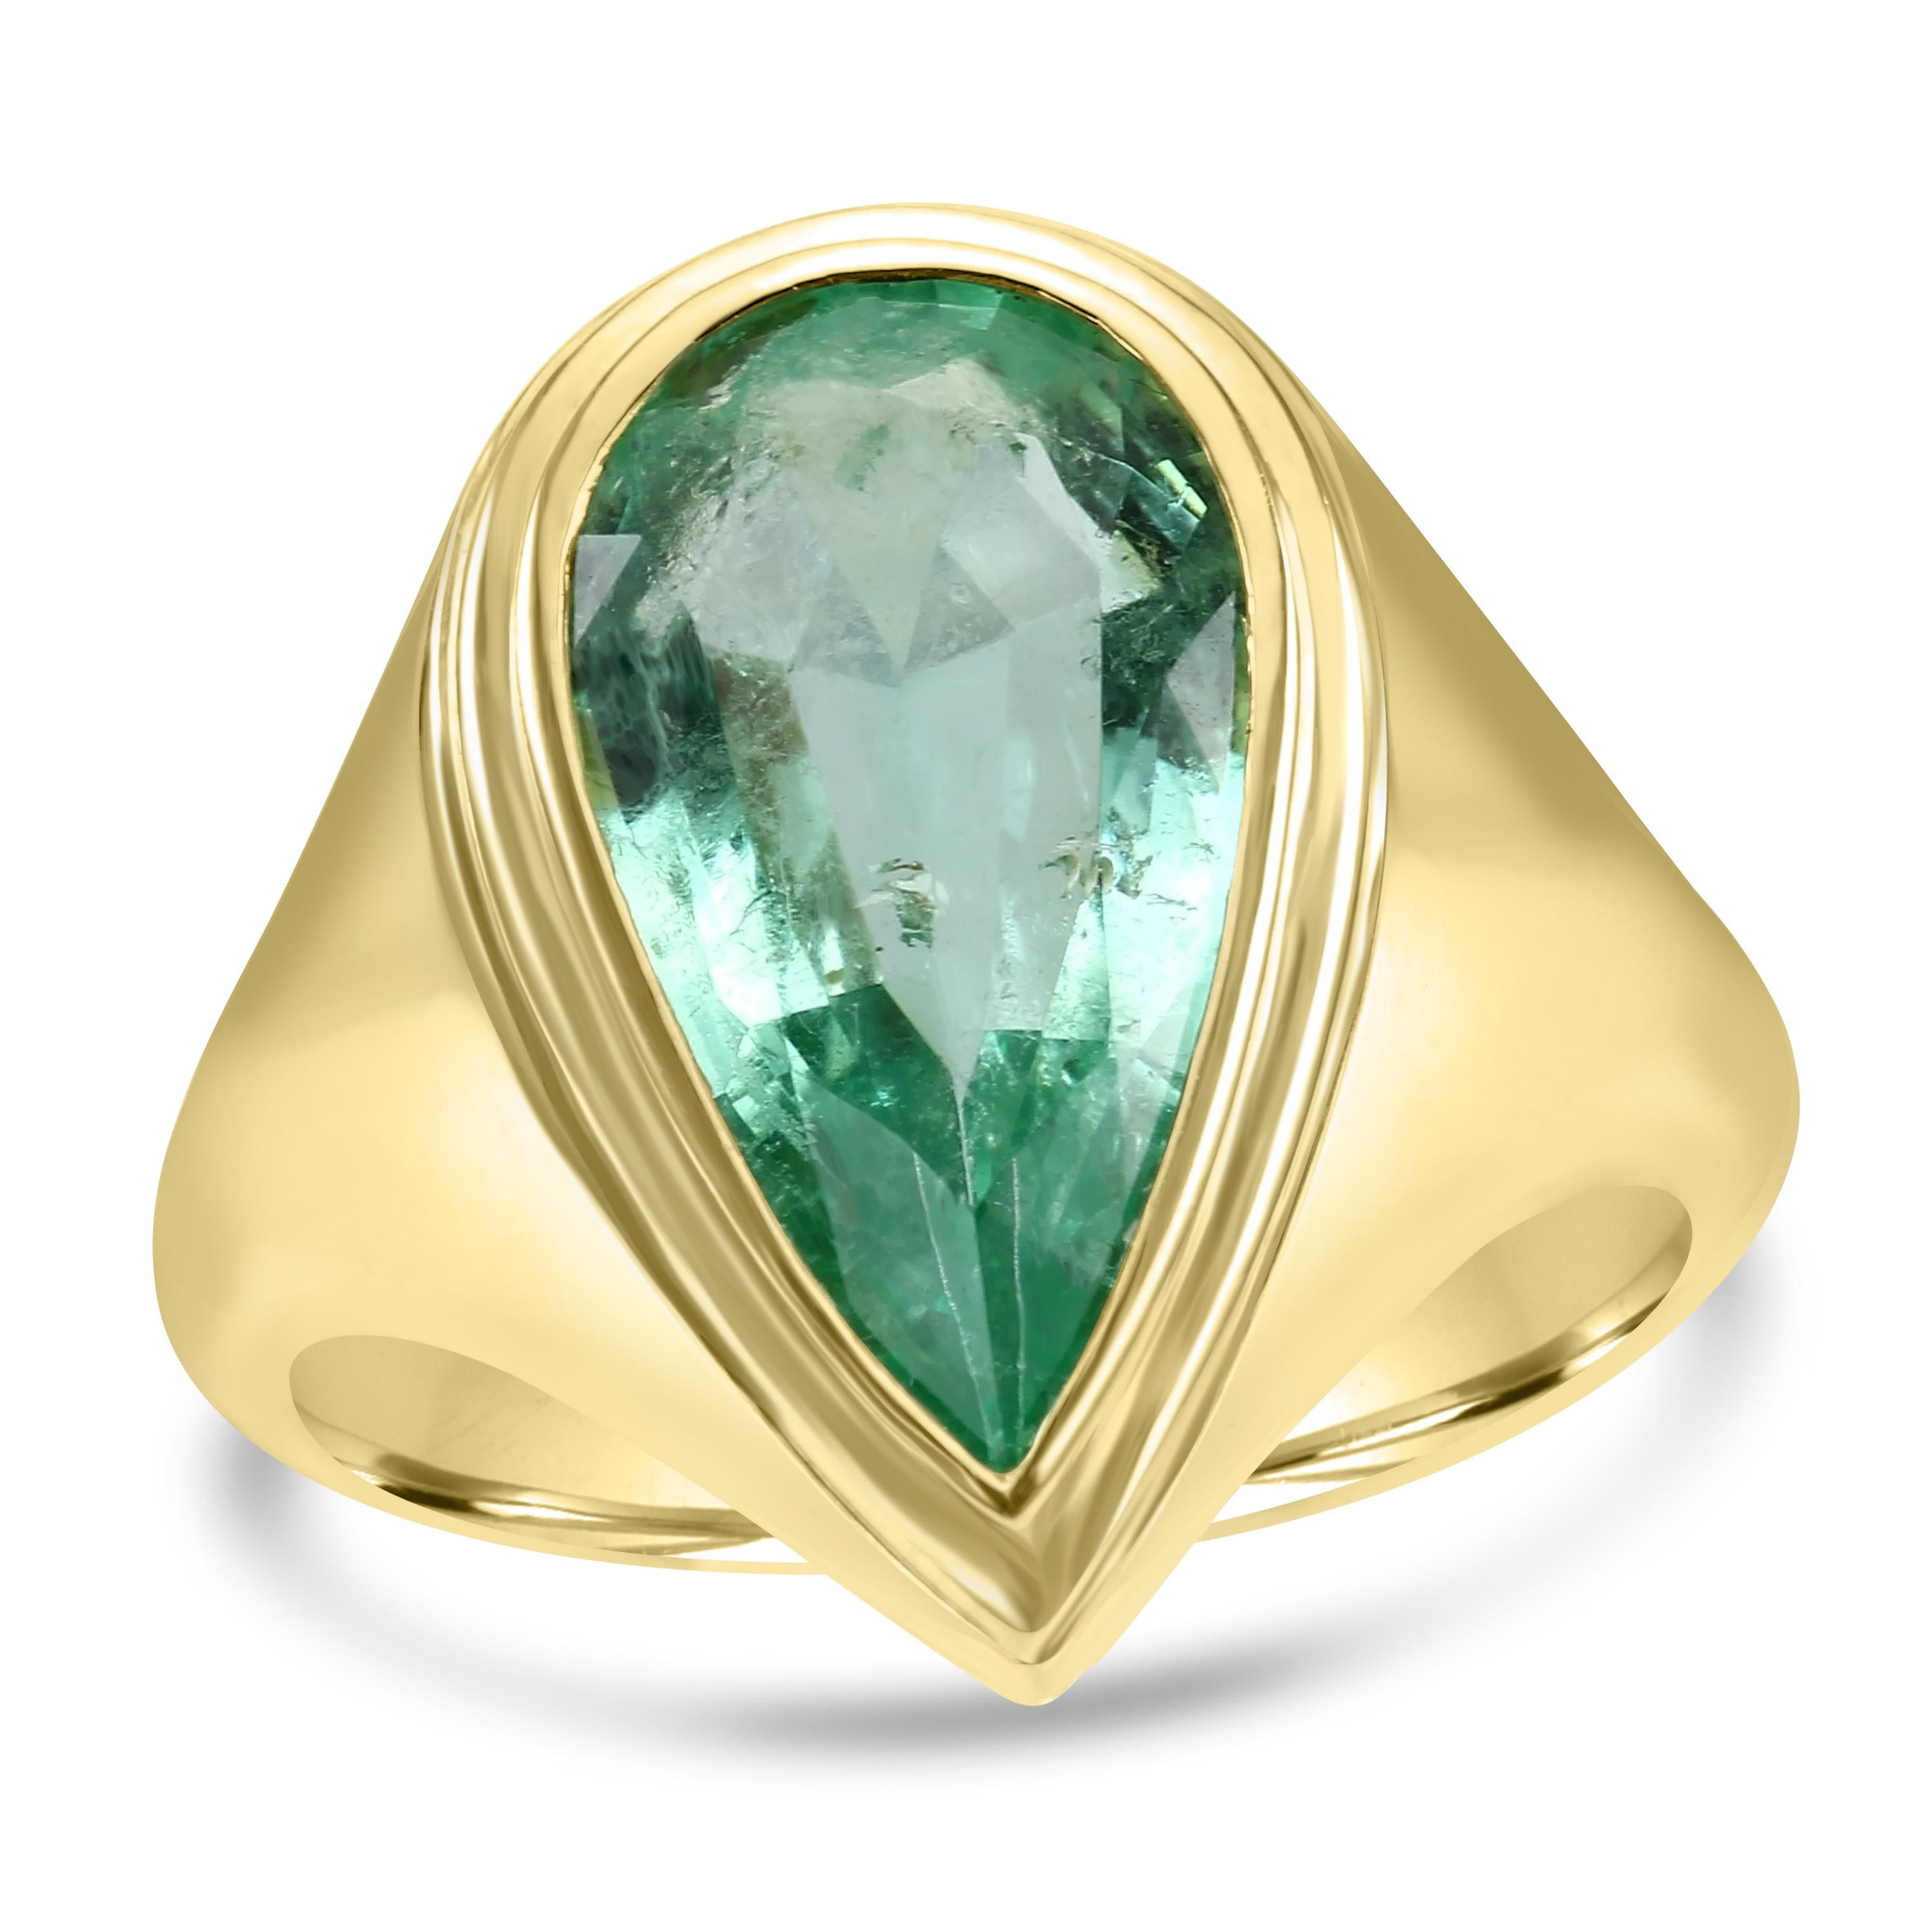 Elevate your love story with our exquisite Fashion Bridal Bezel-Set Emerald Ring.

The star of this bridal ring is the captivating Pear-shaped Muzo- Colombian Emerald from the Muzo mine in Colombia, known for its rich green hue and elegant